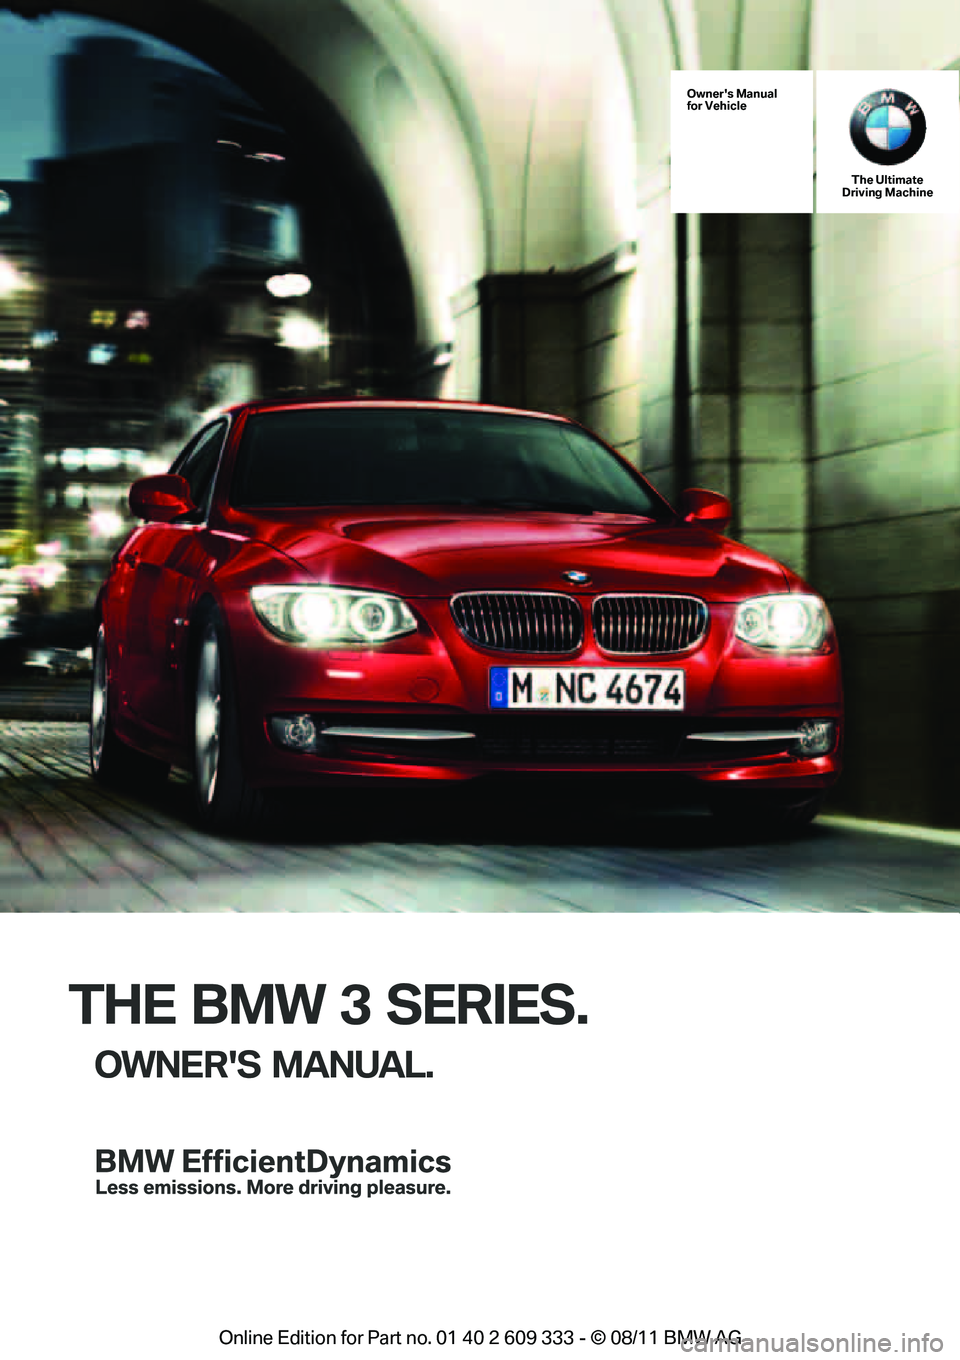 BMW 335I CONVERTIBLE 2012  Owners Manual THE BMW 3 SERIES.
OWNERS MANUAL.
Owners Manual
for VehicleThe Ultimate
Driving Machine
Online  Edition  for Part  no. 01 40 2 609  333 - \251  08/11  BMW AG  